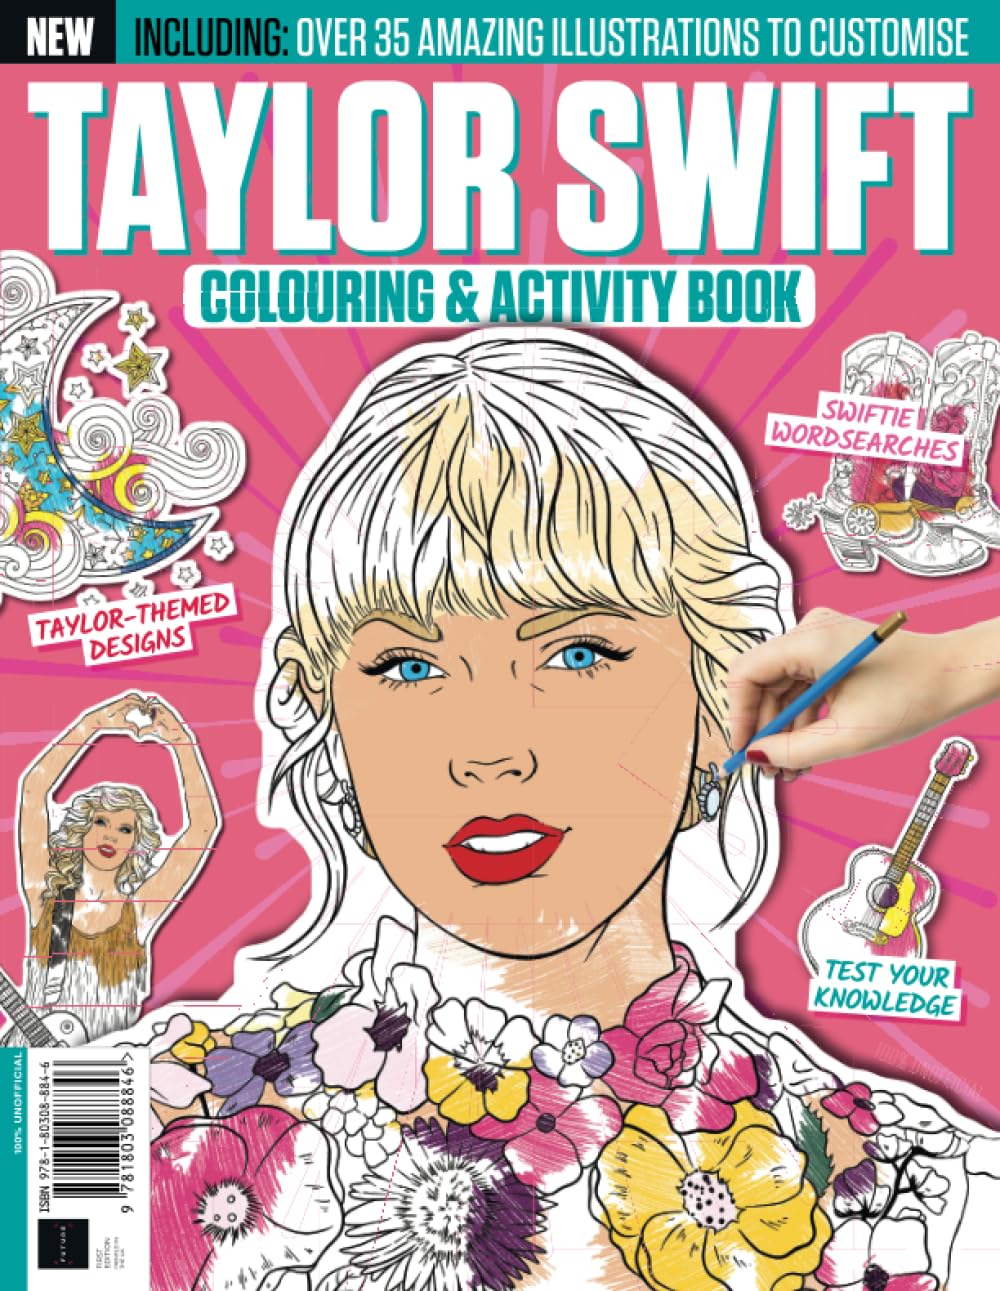 Taylor Swift Colouring & Activity Book - The 100% Unofficial Must Have!: Over 35 Amazing Illustrations to Customise